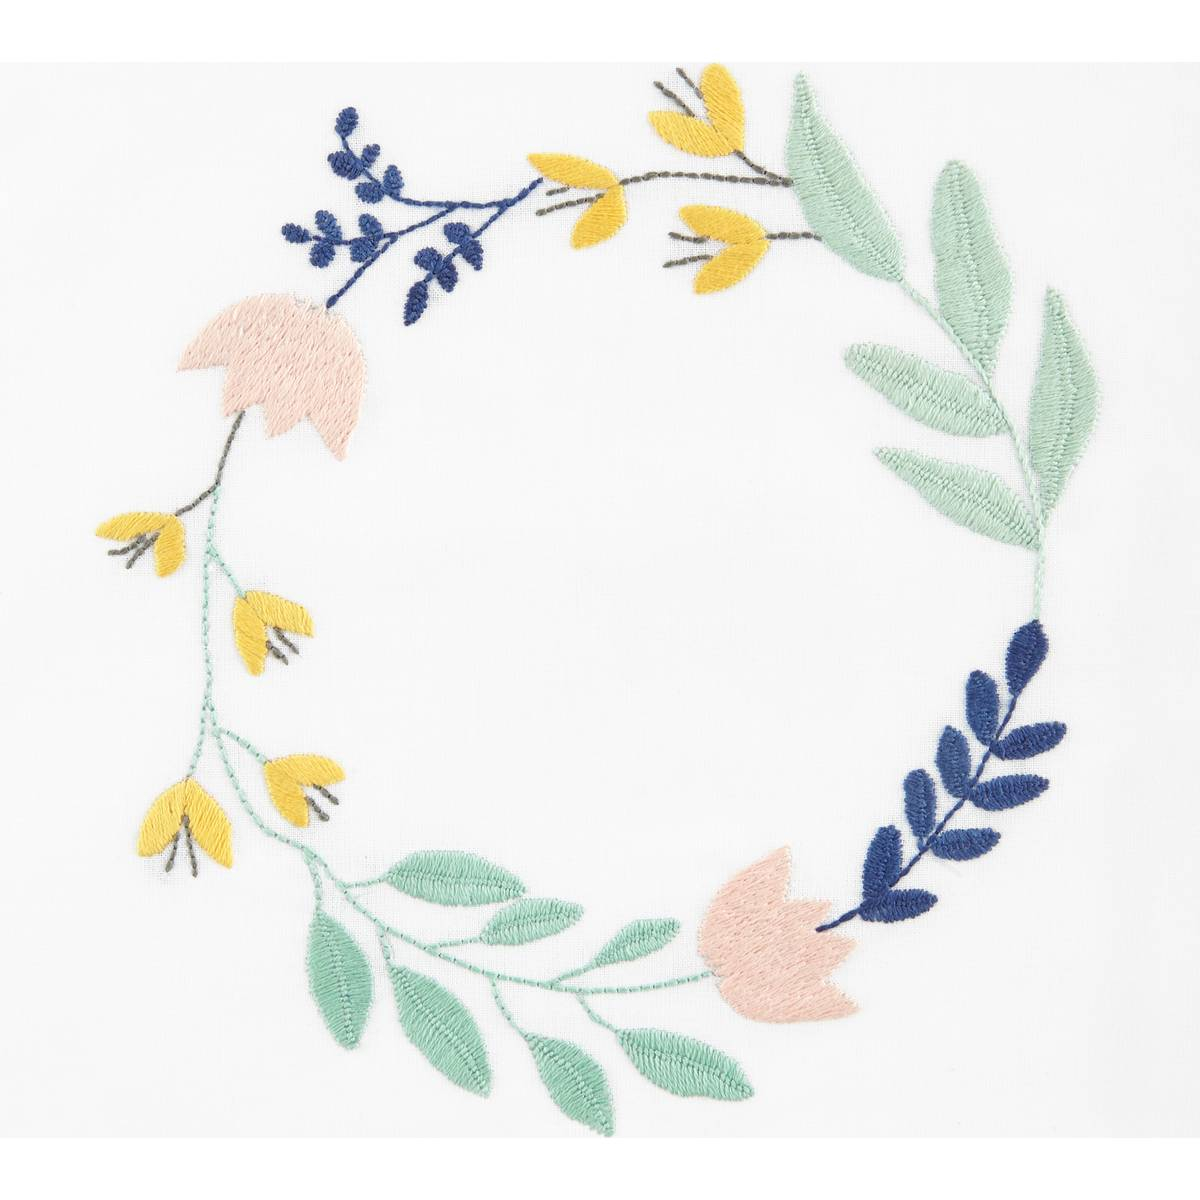 Machine Embroidery Patterns Free Download Free Pattern Dmc Floral Wreath Embroidery 0054 Hobcraft